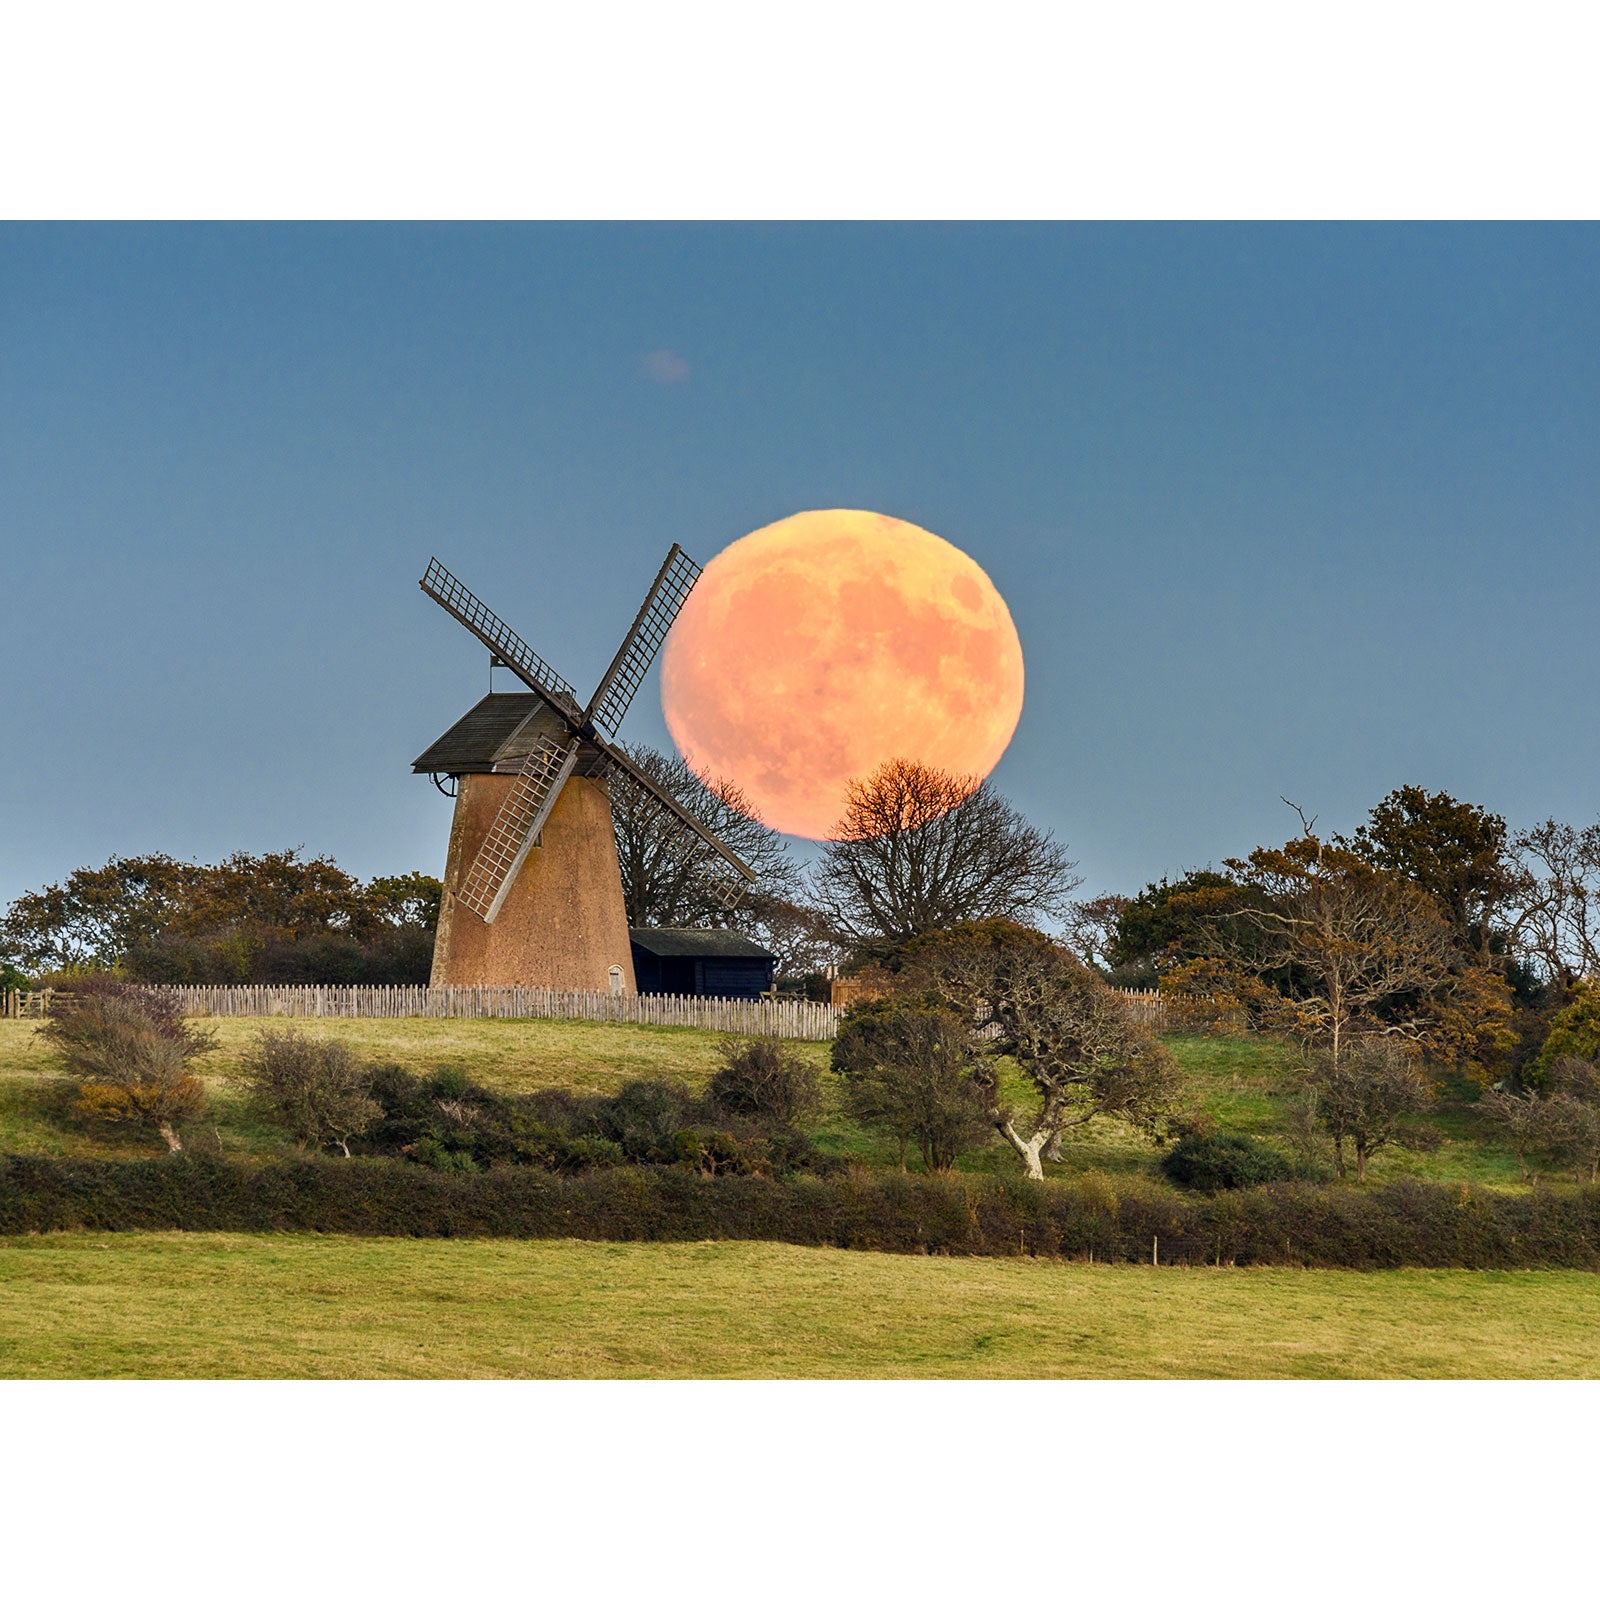 A Supermoon over Bembridge Windmill rising behind a traditional windmill in a pastoral setting on the Isle of Wight, captured by Available Light Photography.